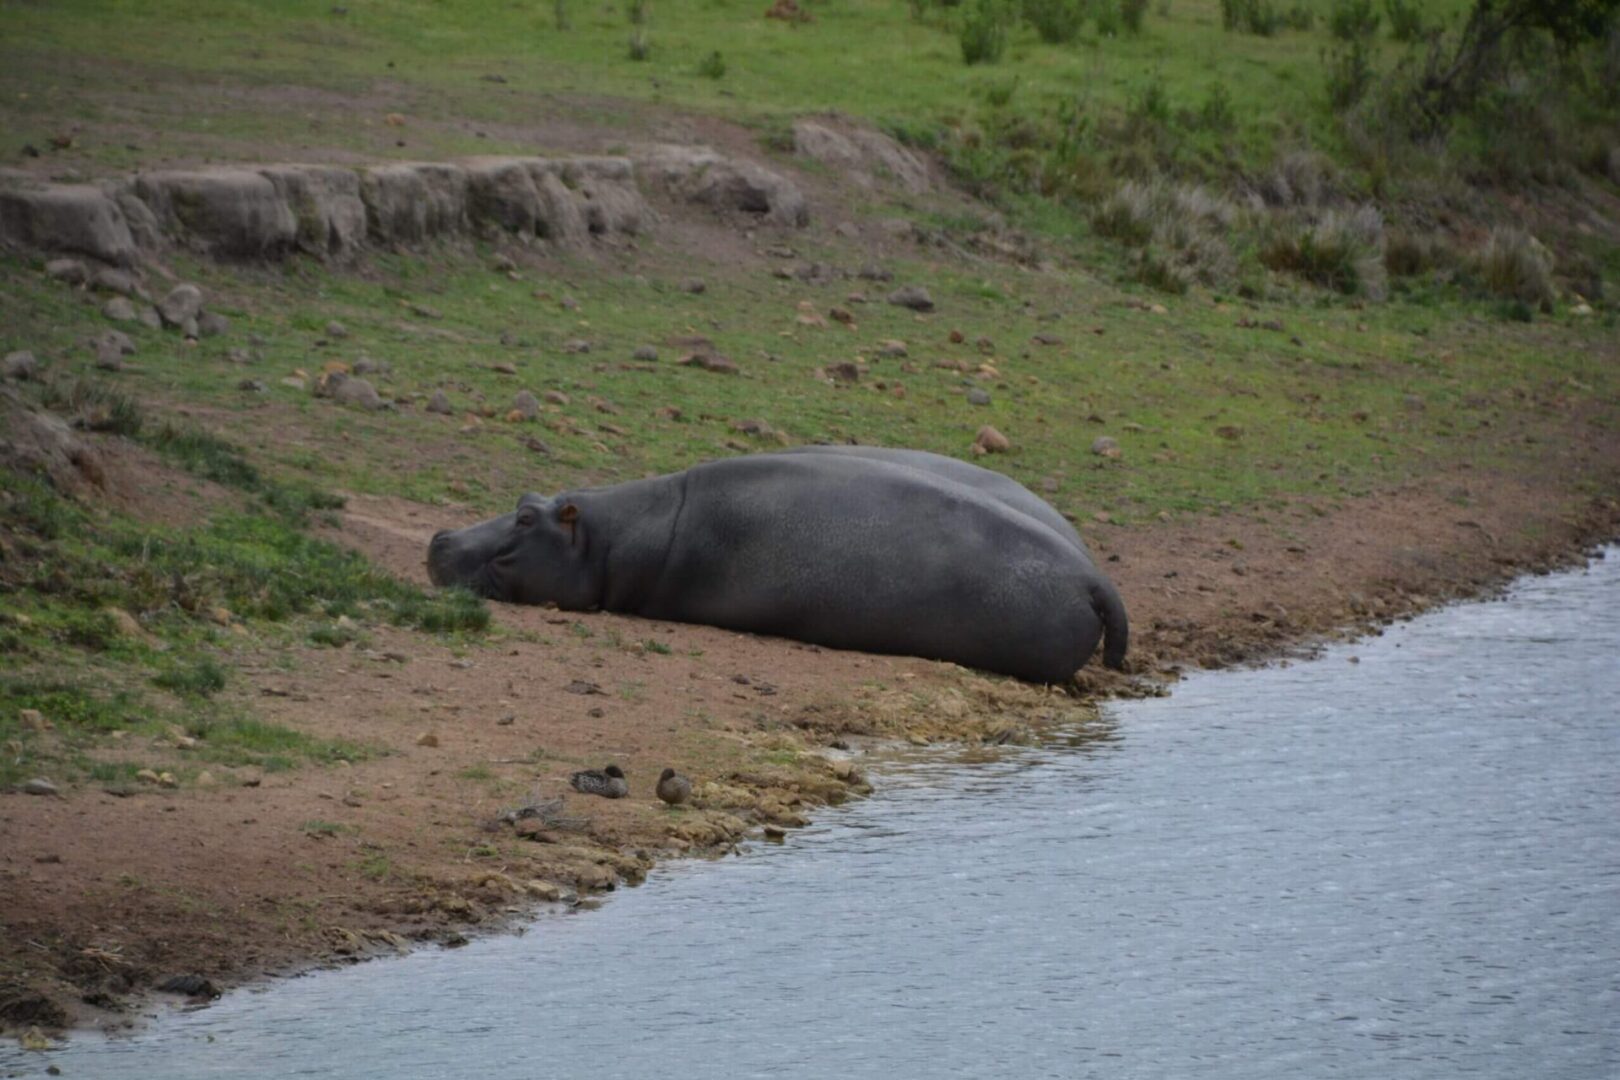 A hippo laying on the ground near water.